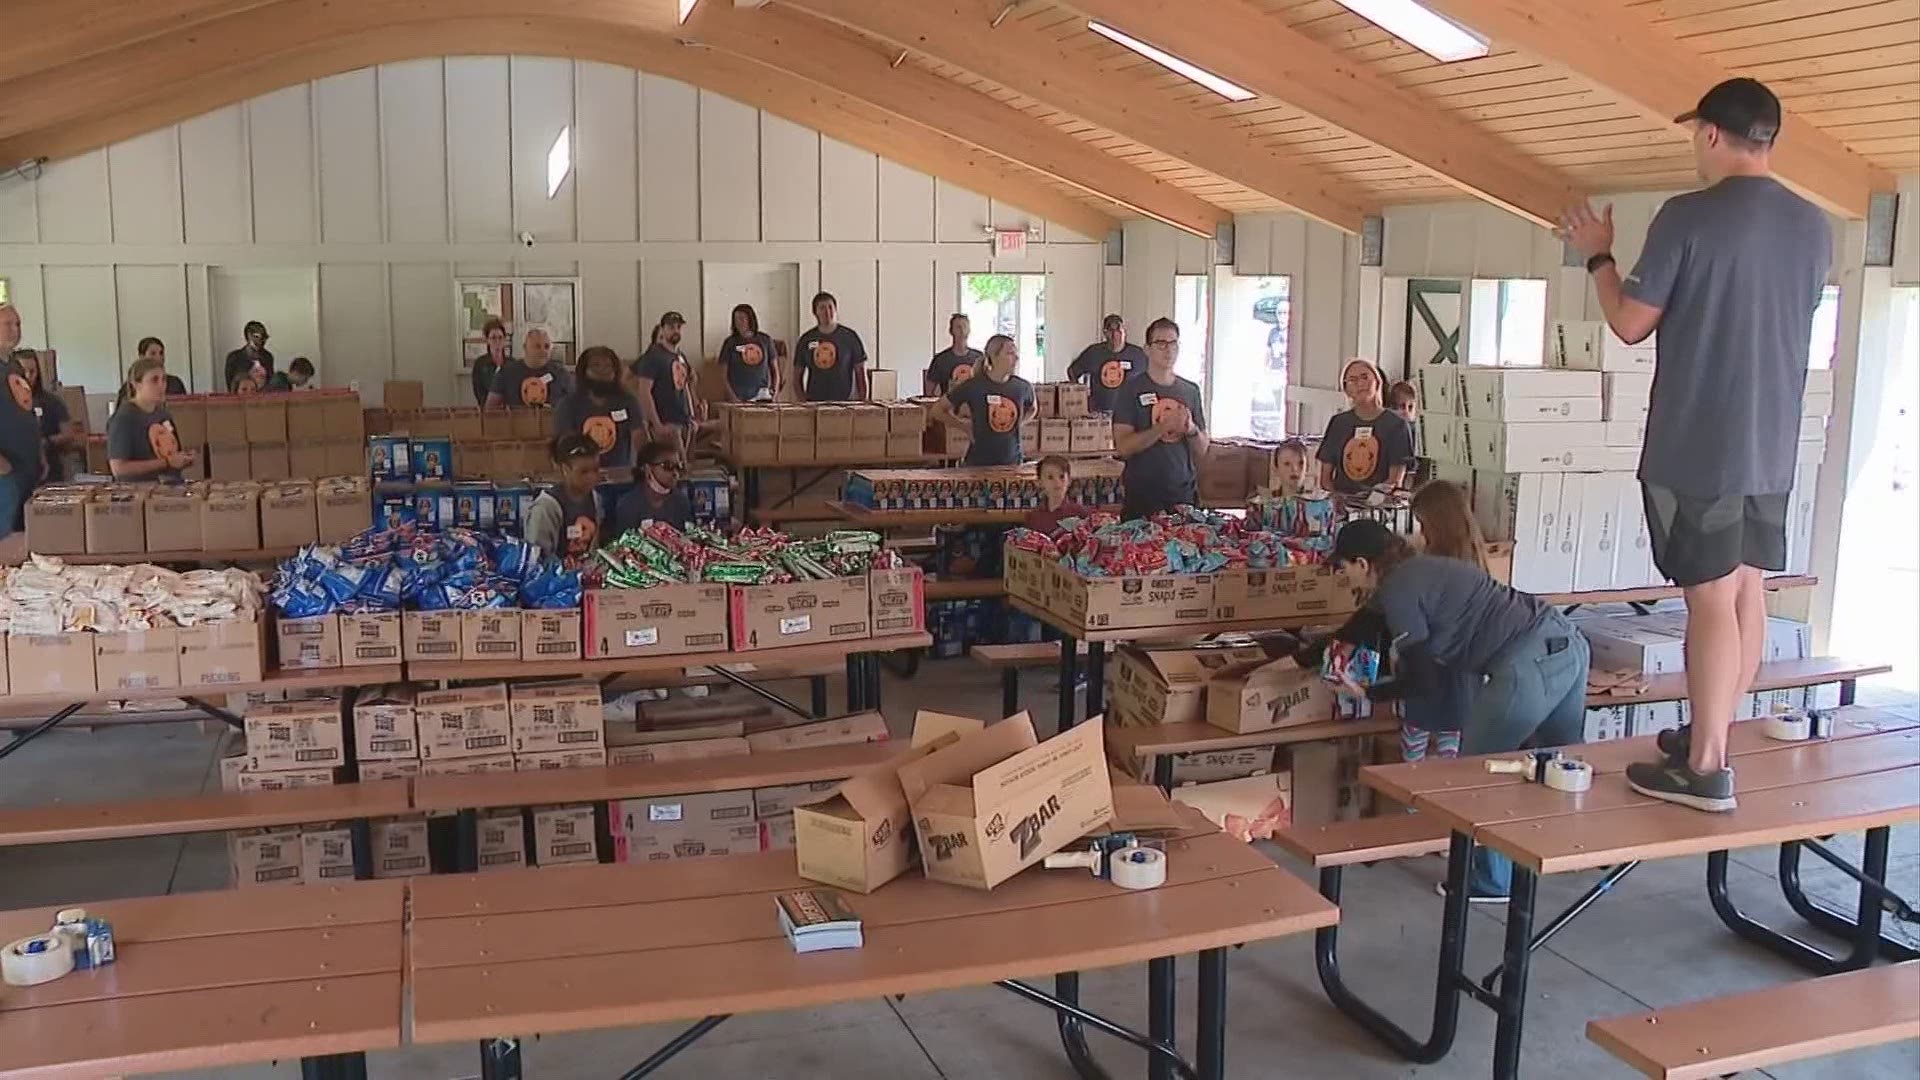 A Gahanna community gathered on Saturday to help fight food insecurity.